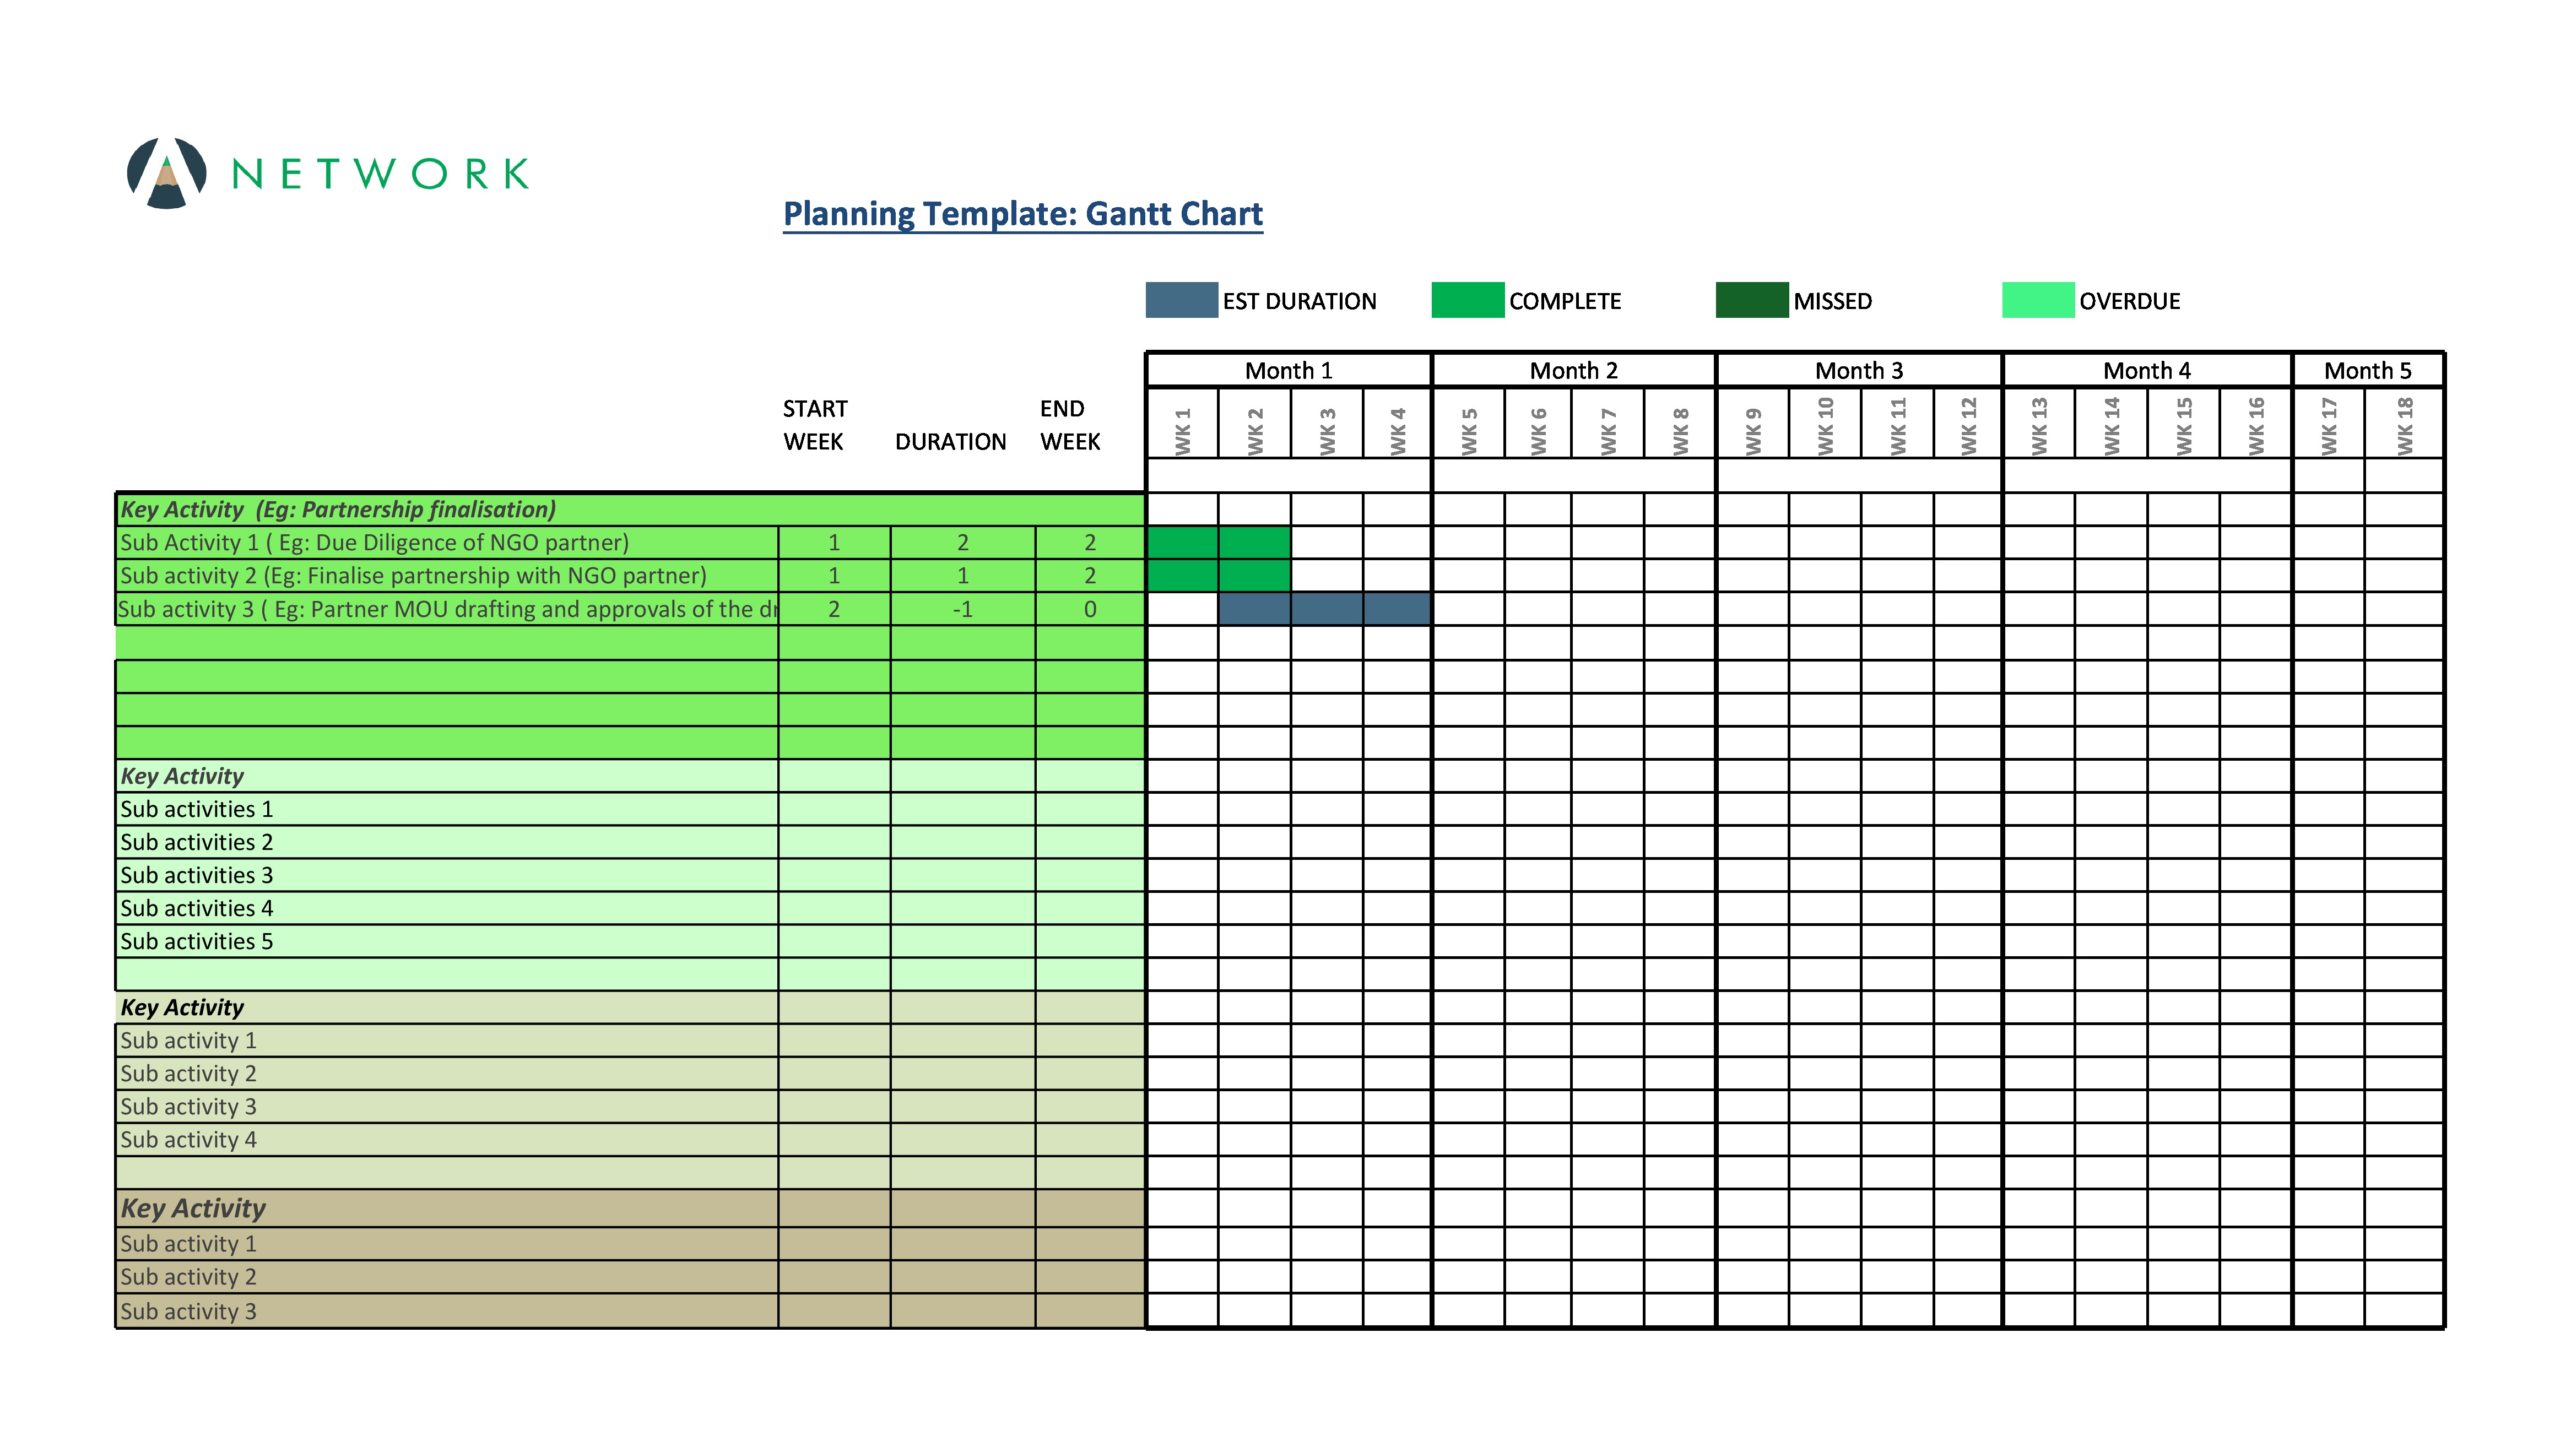 free template for gantt chart in excel